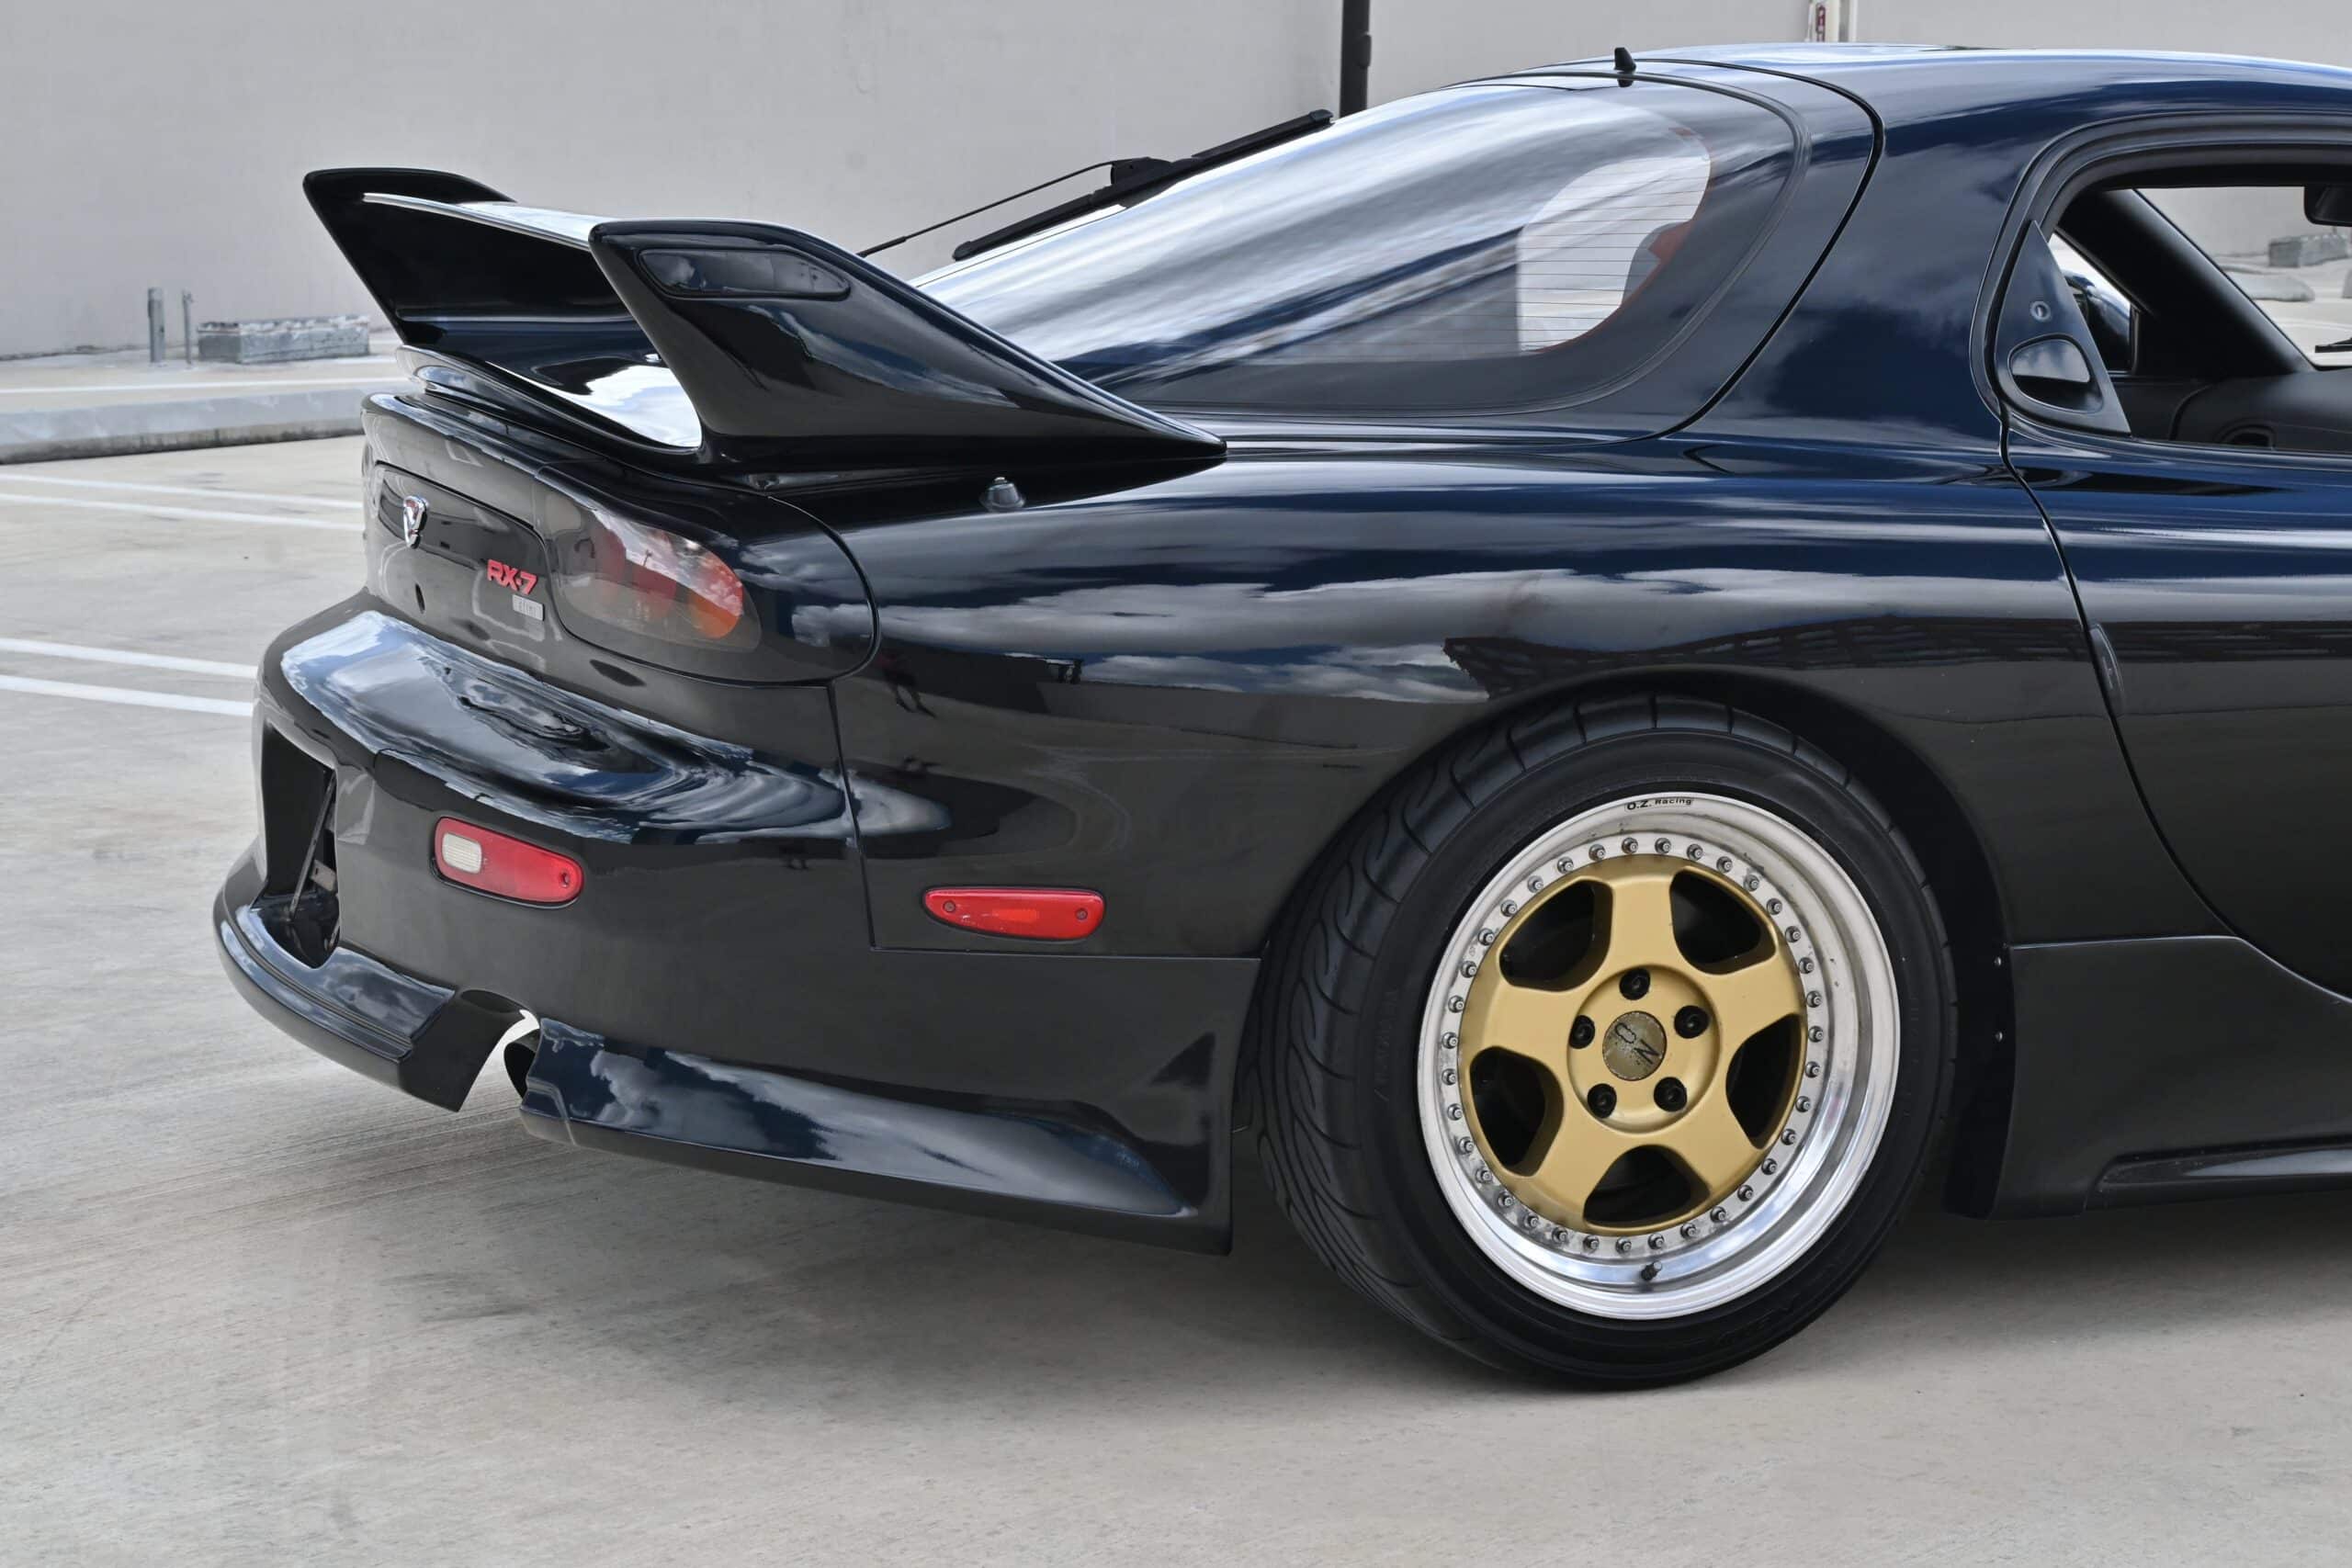 1994 Mazda RX-7 Efini Type R Single Turbo TD-06 450+HP / HKS Coilovers / Over $30,000 in receipts / records Original Paint / fully documented / Turn key